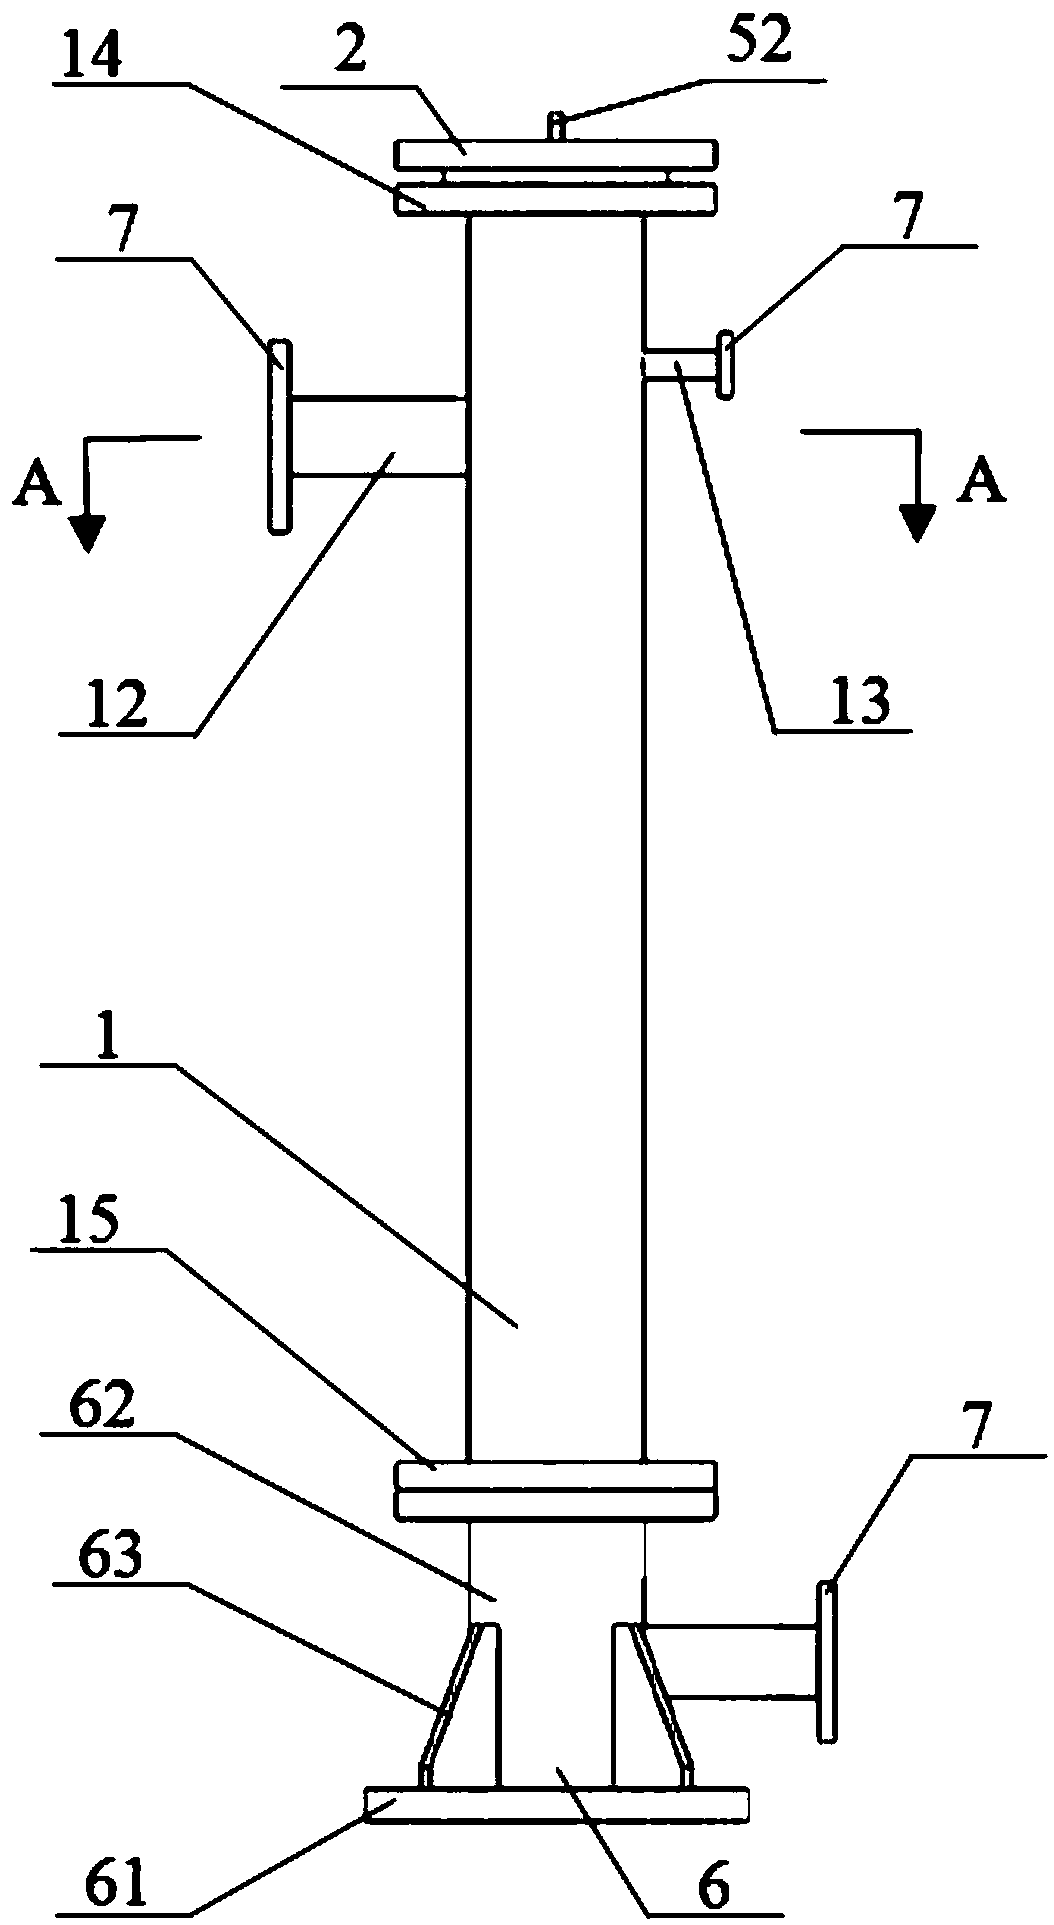 A cyclone electrostatic coalescence device